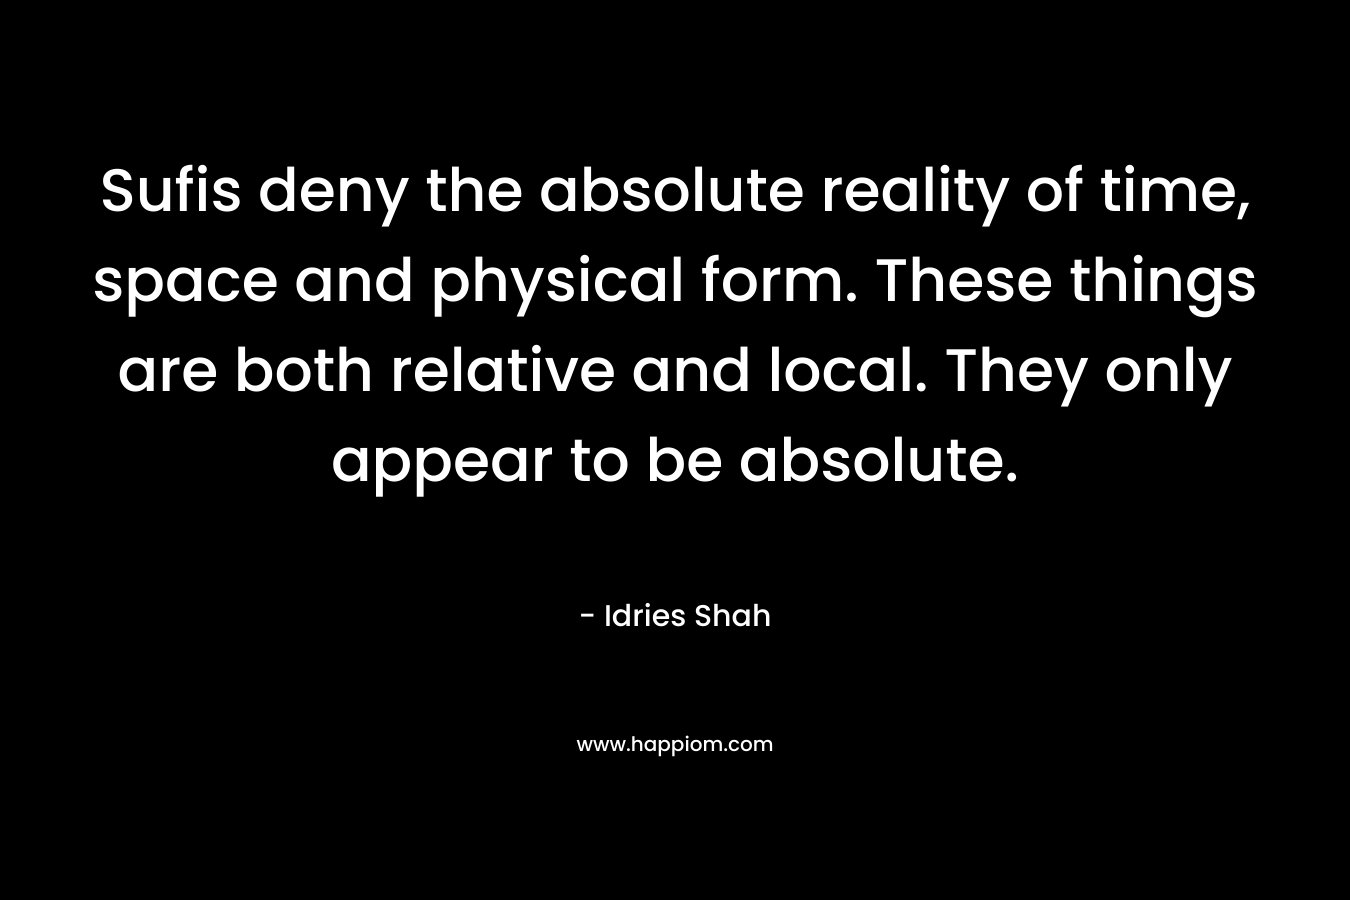 Sufis deny the absolute reality of time, space and physical form. These things are both relative and local. They only appear to be absolute.